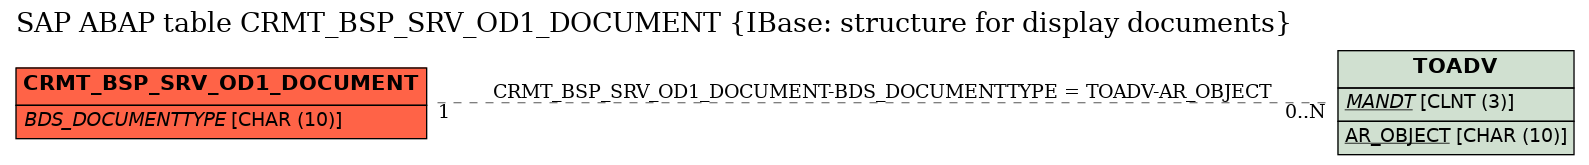 E-R Diagram for table CRMT_BSP_SRV_OD1_DOCUMENT (IBase: structure for display documents)